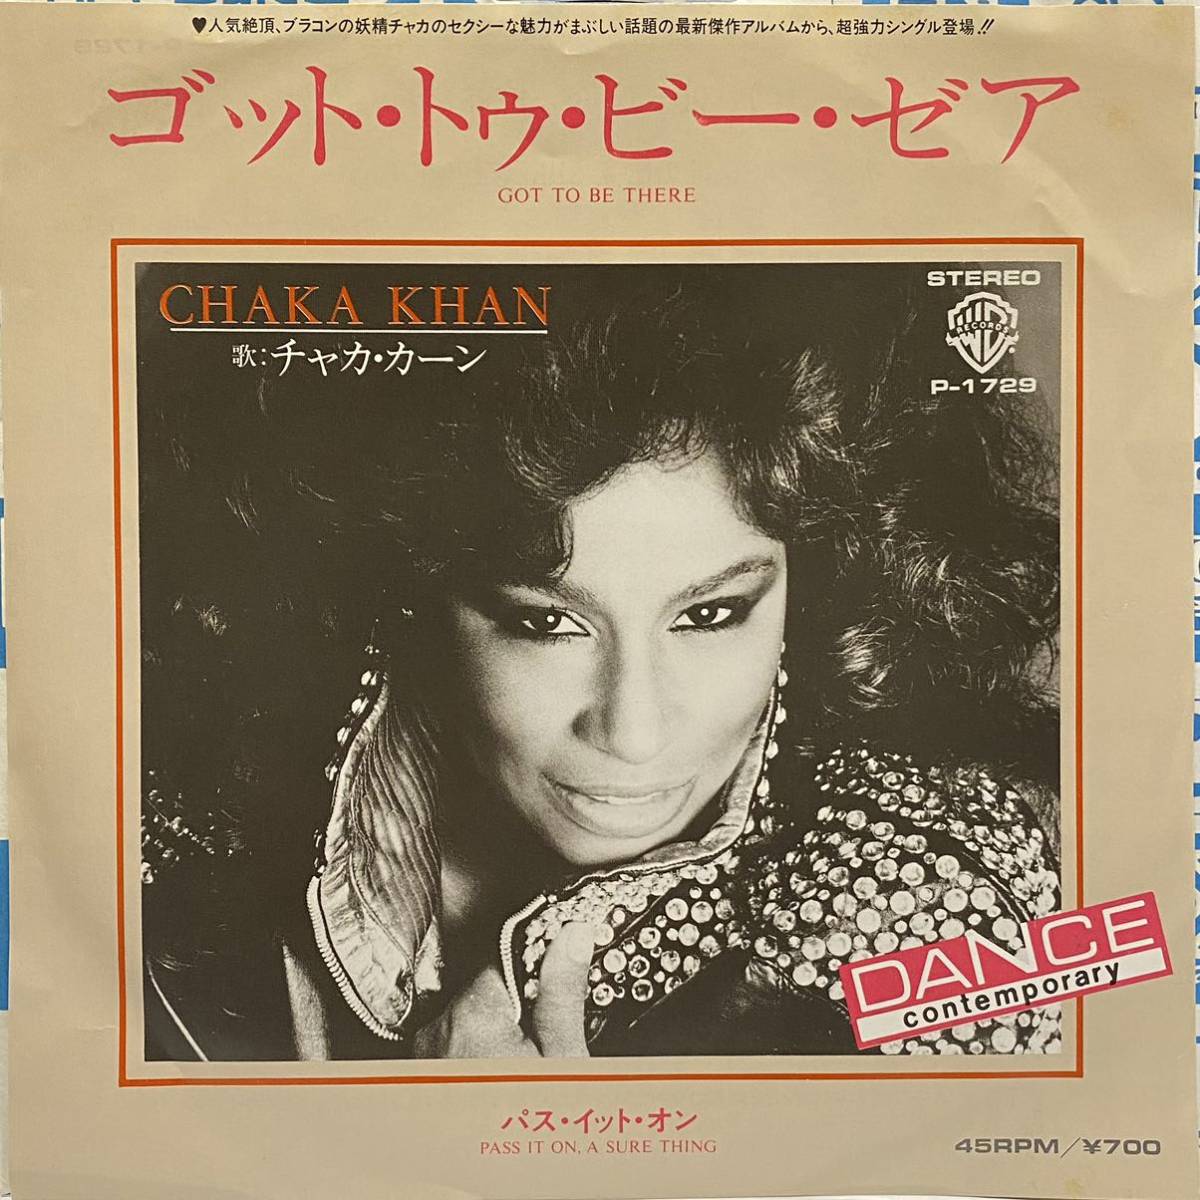 Chaka Khan got to be there pass it on a sure thing チャカ カーン 7inch 7インチ EP 国内盤 Michael Jackson マイケルジャクソン カバーの画像1